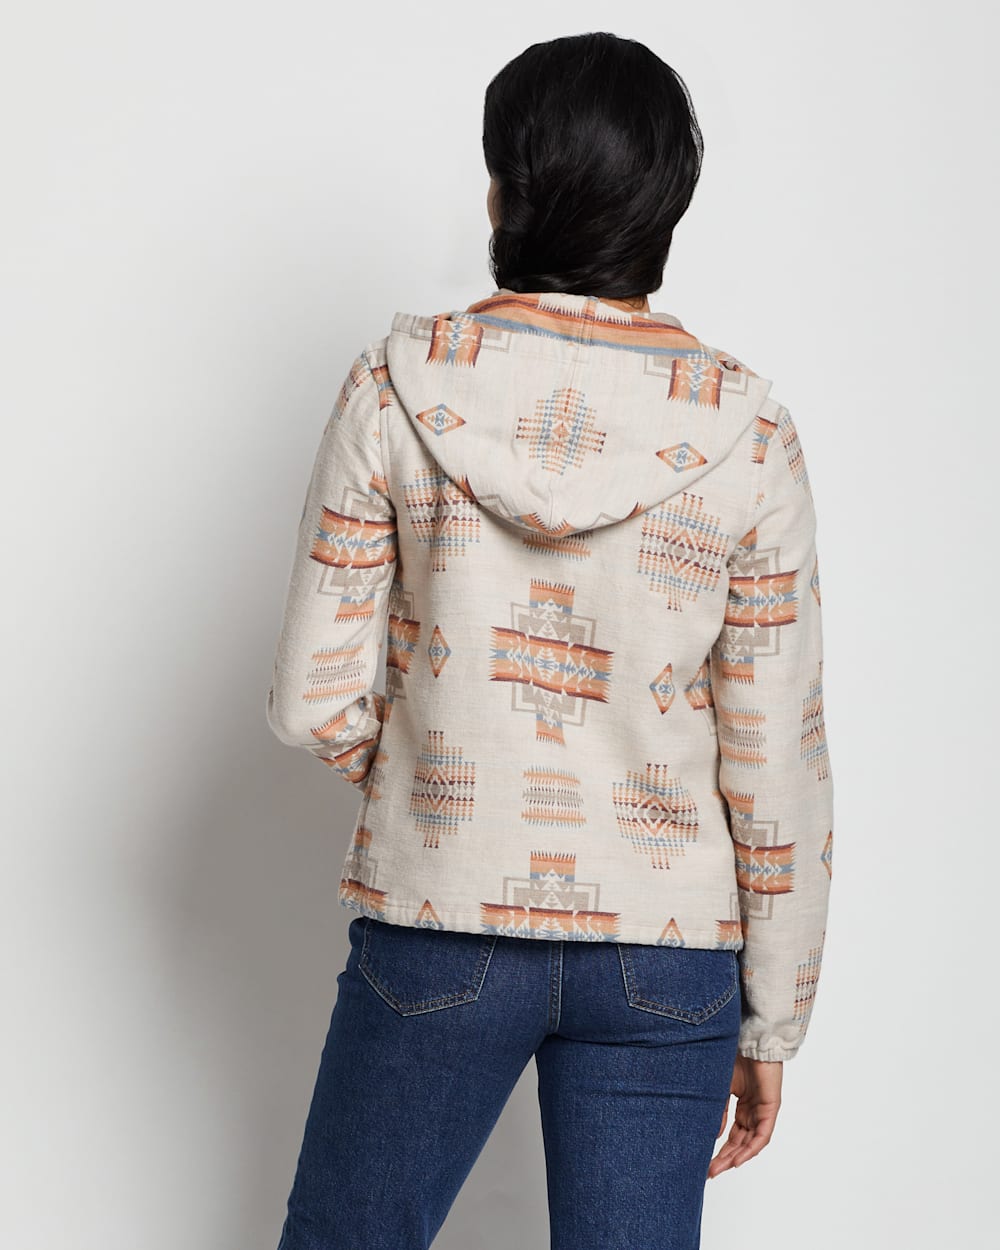 ALTERNATE VIEW OF WOMEN'S LIGHTWEIGHT DOUBLESOFT HOODIE IN ROSEWOOD CHIEF JOSEPH image number 6